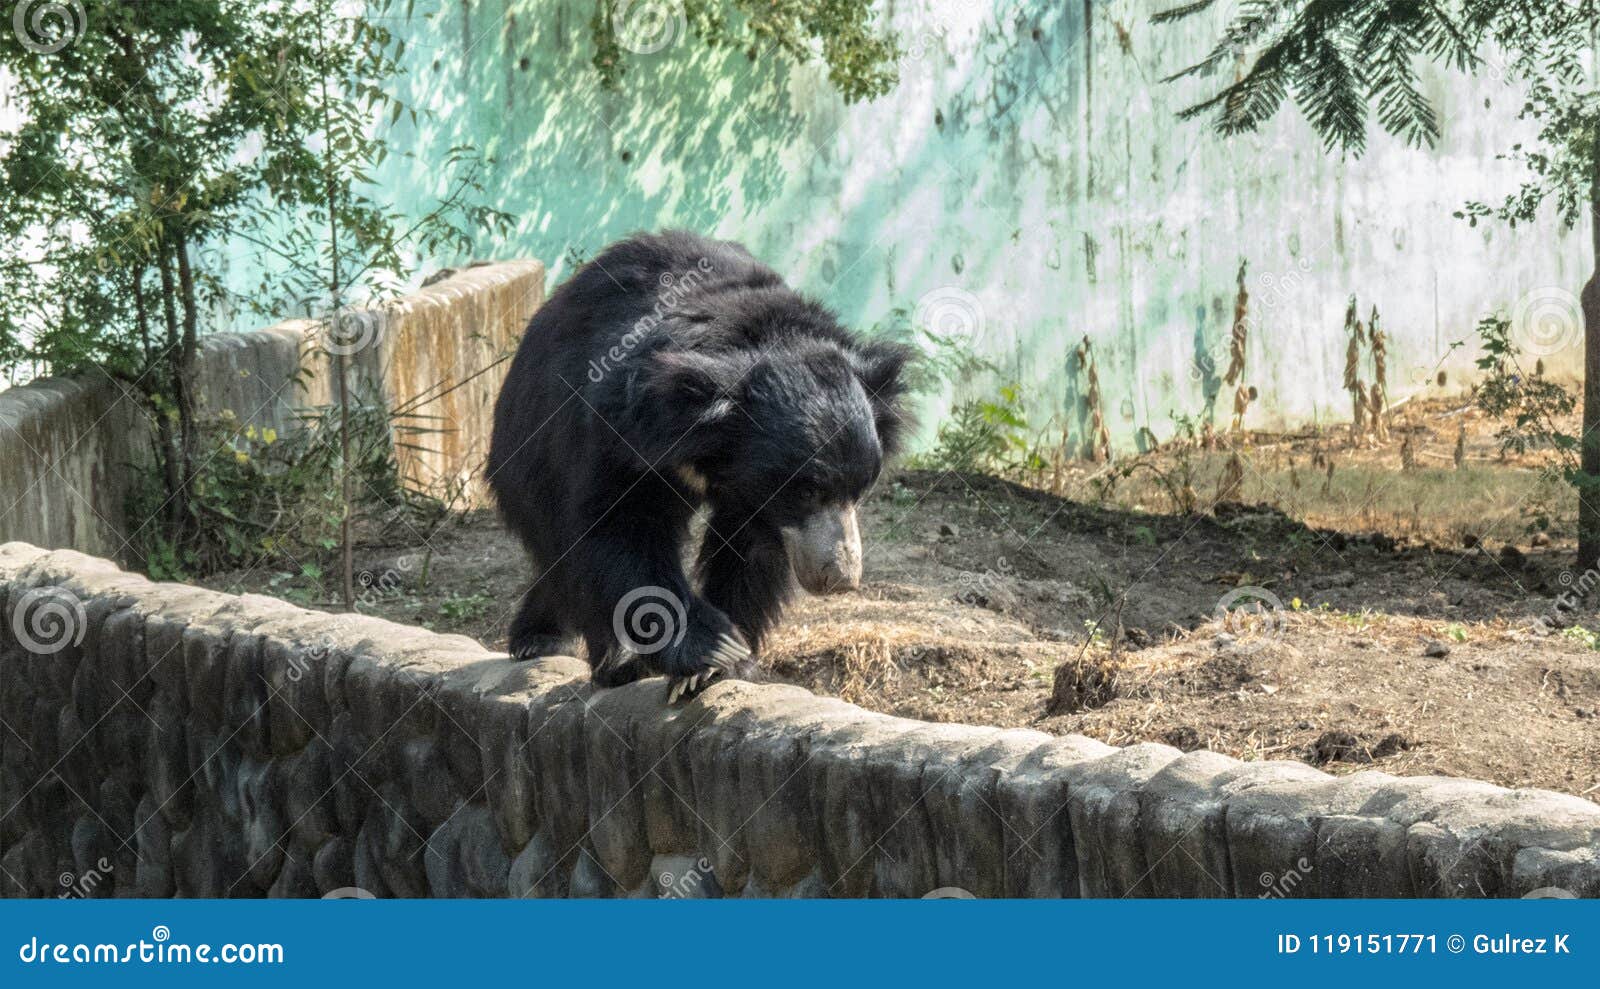 Sloth Bear Walking on a Wall-Indore Zoo, India Stock Image - Image of  aviary, forest: 119151771